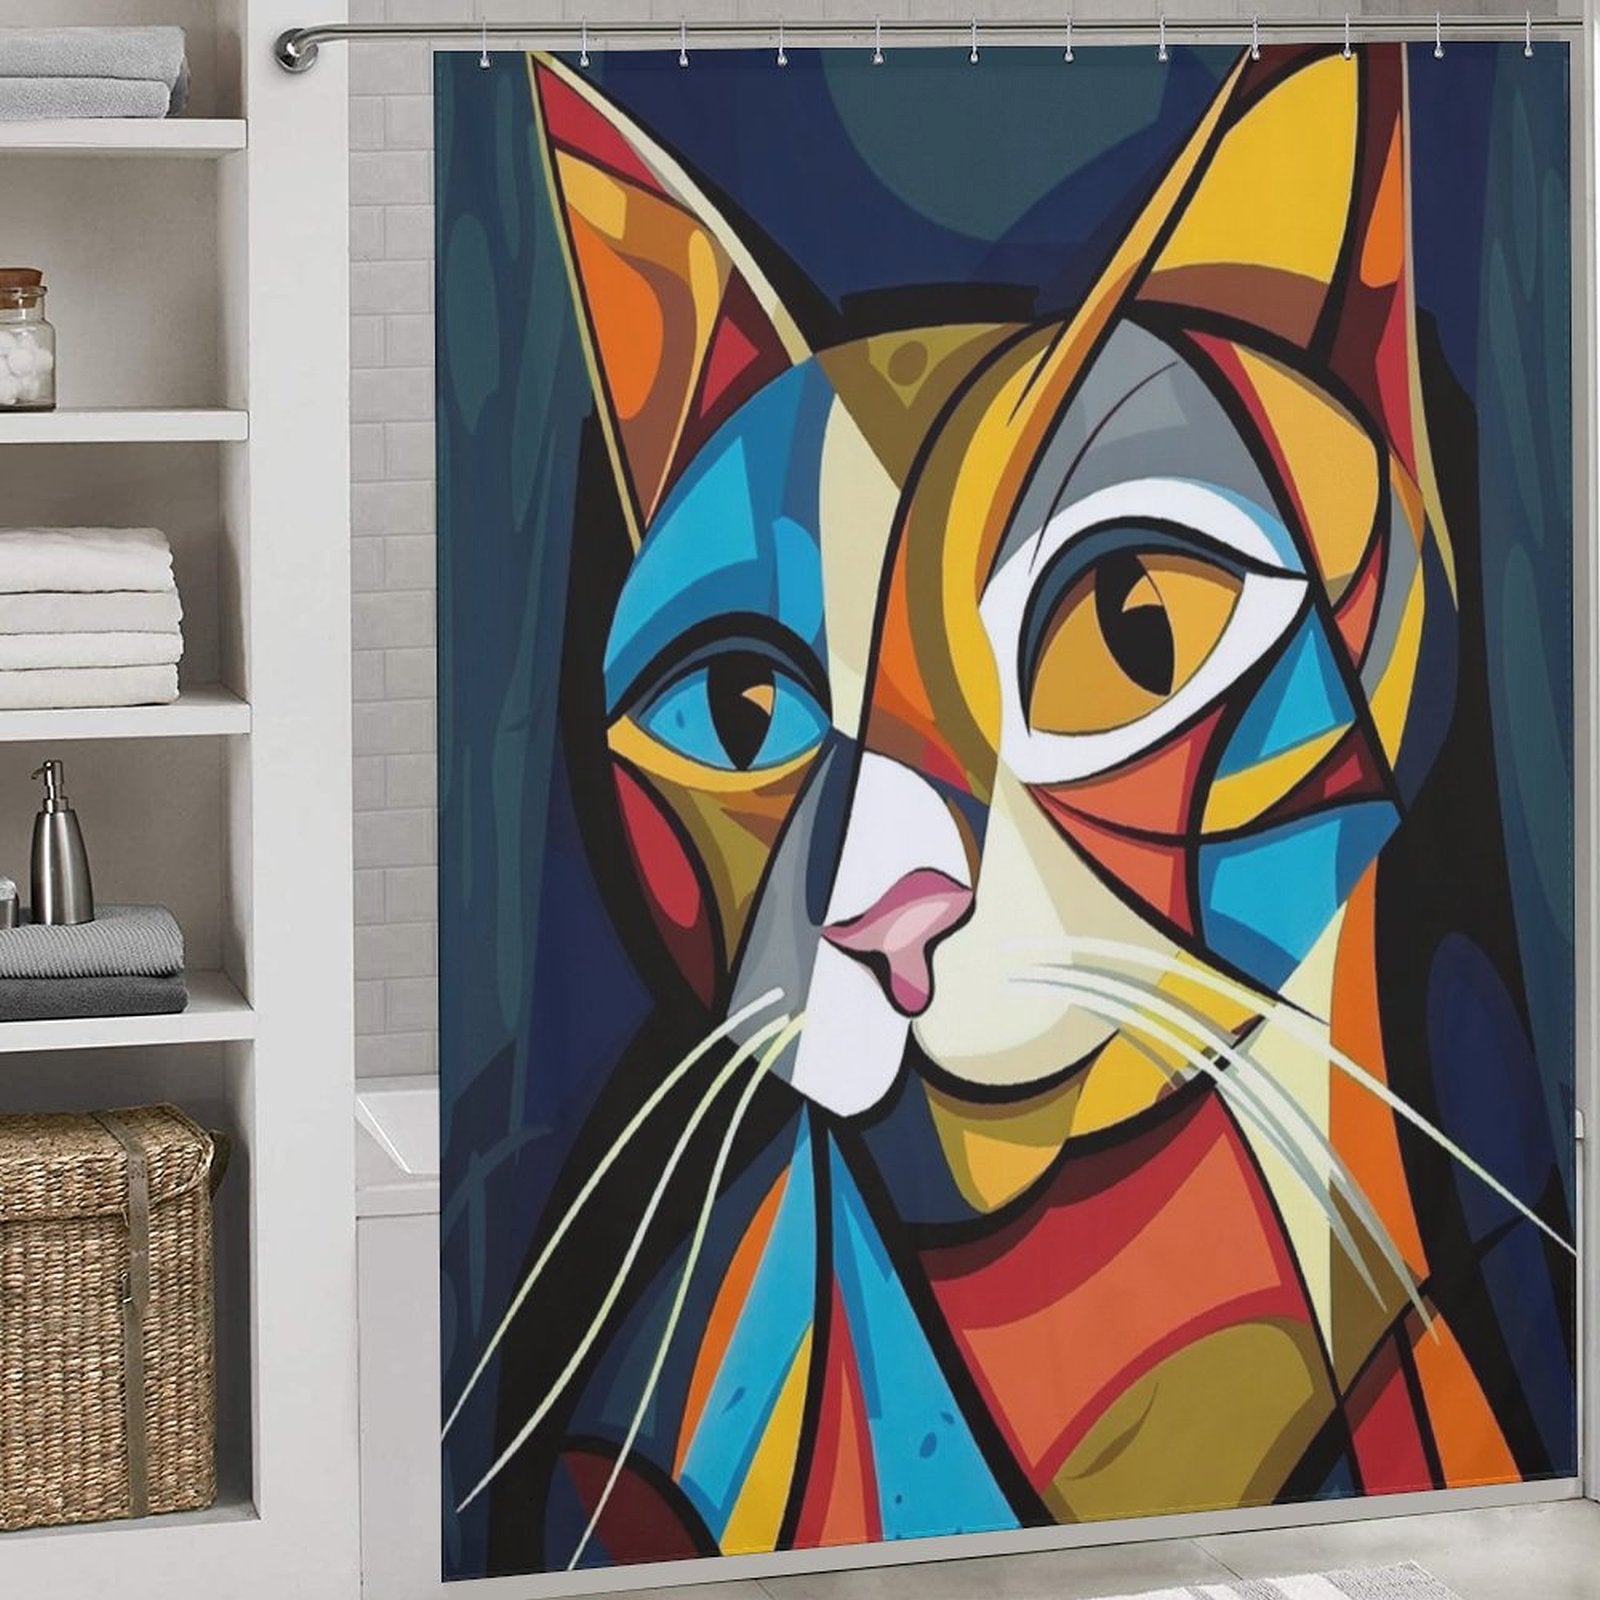 A Cotton Cat Abstract Geometric Vintage Colorful Modern Art Minimalist Mid Century Cat Shower Curtain-Cottoncat hangs in a white bathroom with shelves and a wicker basket, adding a touch of modern art bathroom decor.